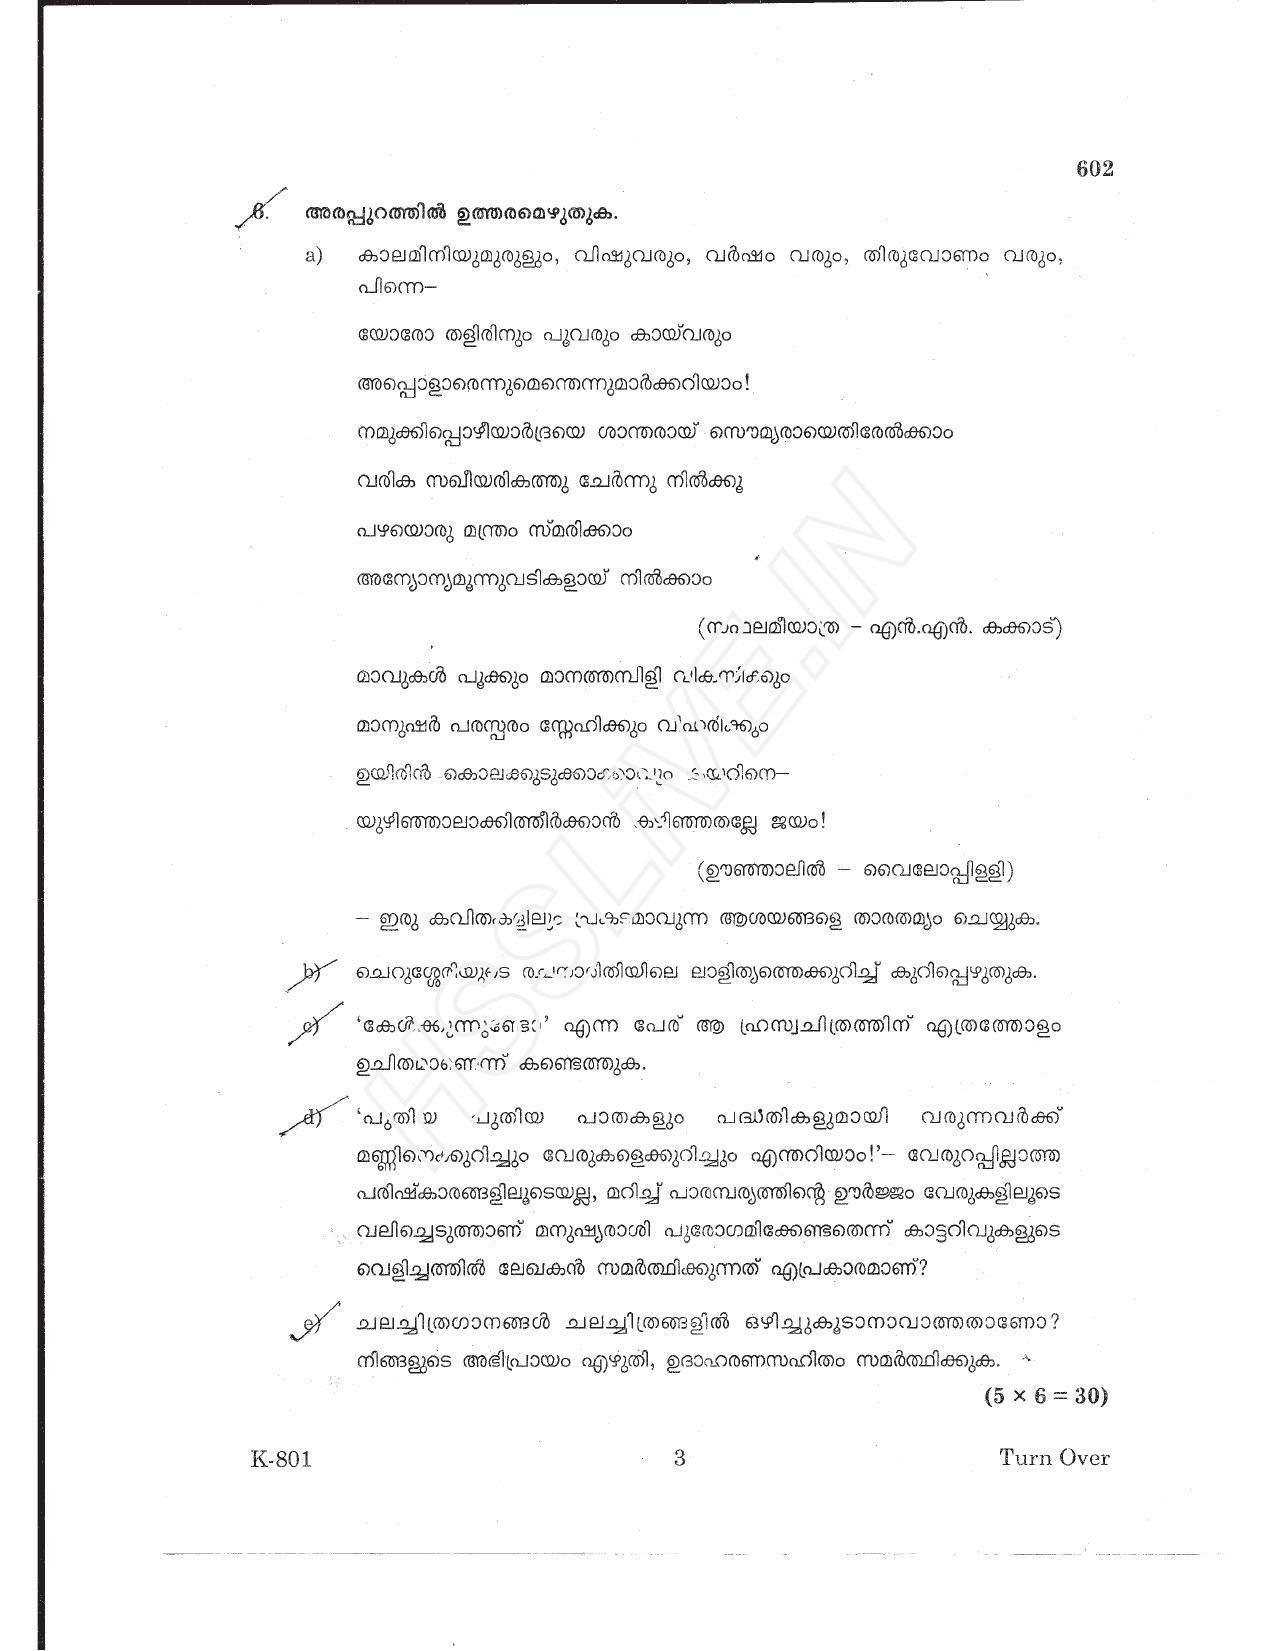 Kerala Plus One 2017 Malayalam Question Papers - Page 3